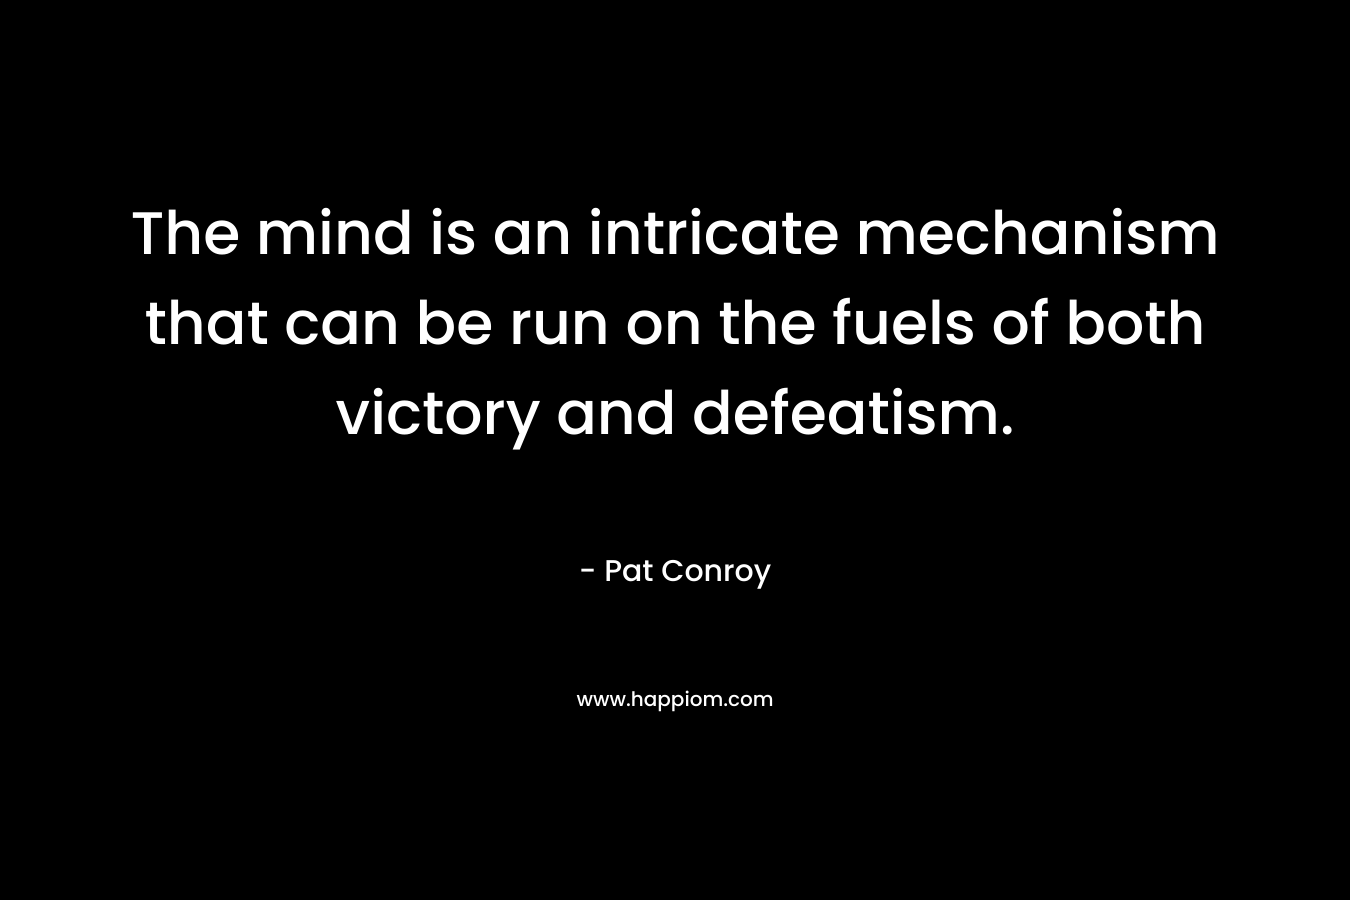 The mind is an intricate mechanism that can be run on the fuels of both victory and defeatism.